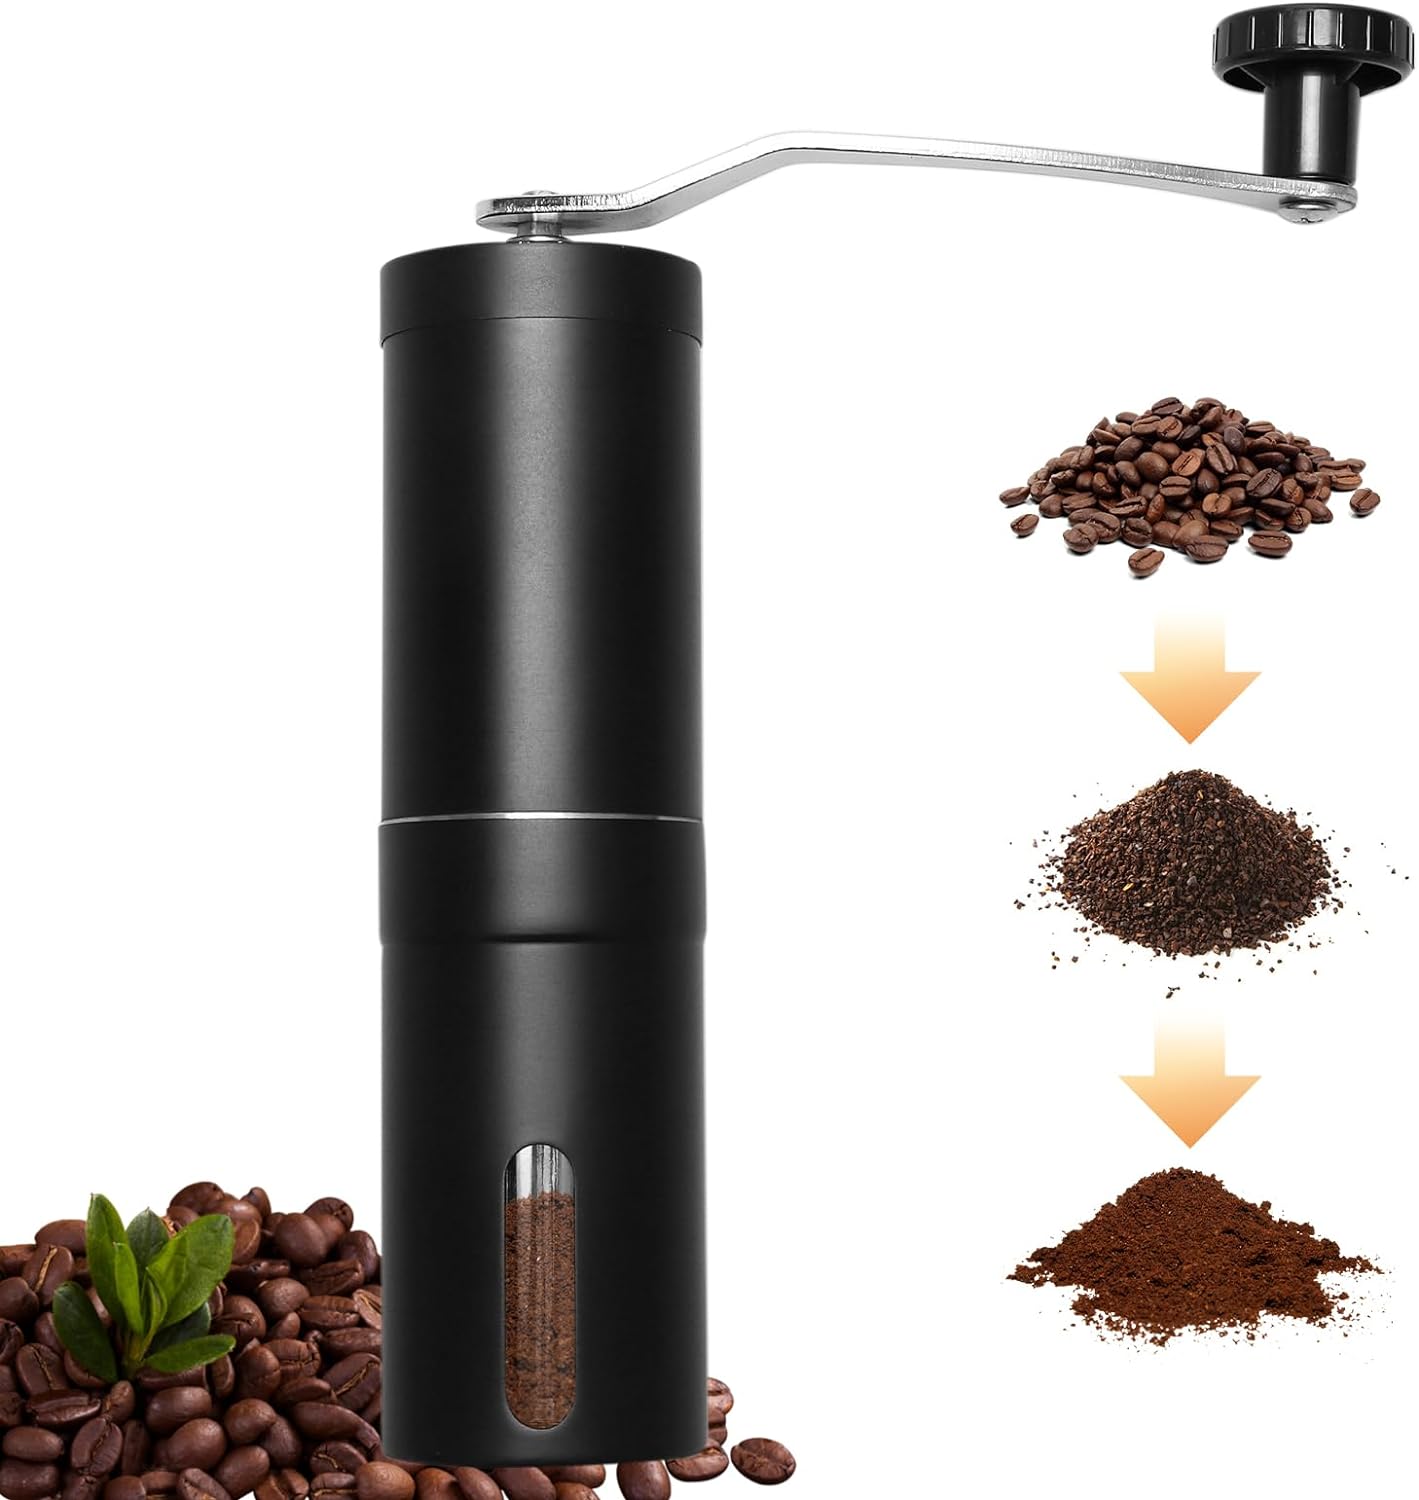 Vuteukis Manual Coffee Grinder with Cone Grinder, Stainless Steel Hand Coffee Grinder, Espresso Grinder, Precise Grinding Adjustment, Ceramic Grinder for Espresso to French Press